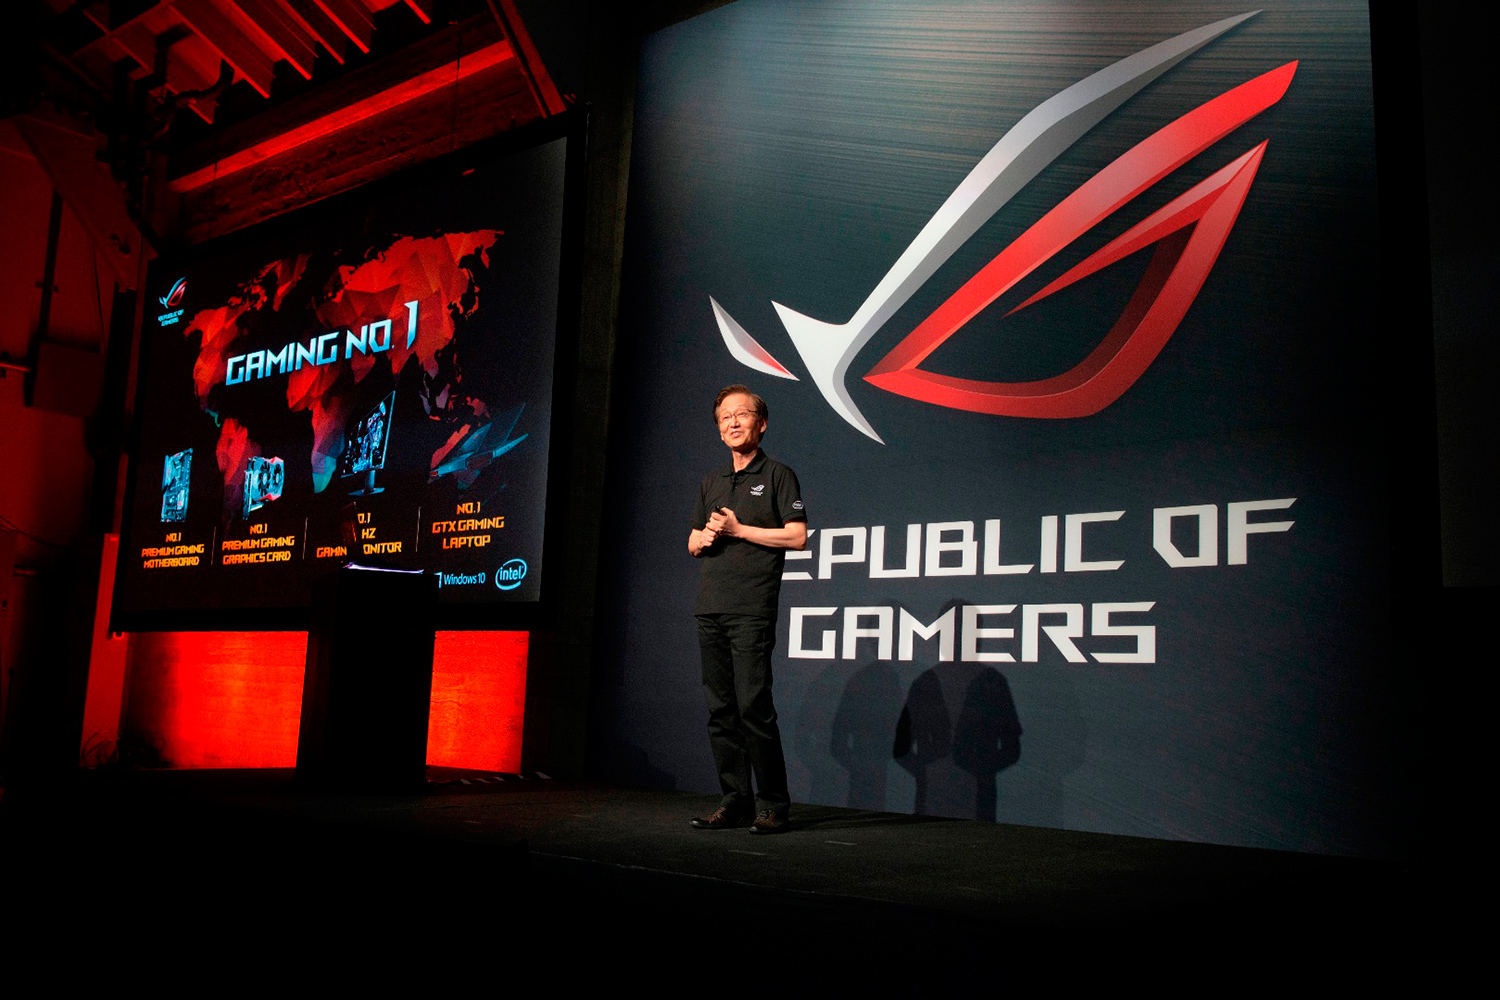 asus republic of gamers unleashed chairman jonney shih reaffirms number one position in gaming industry